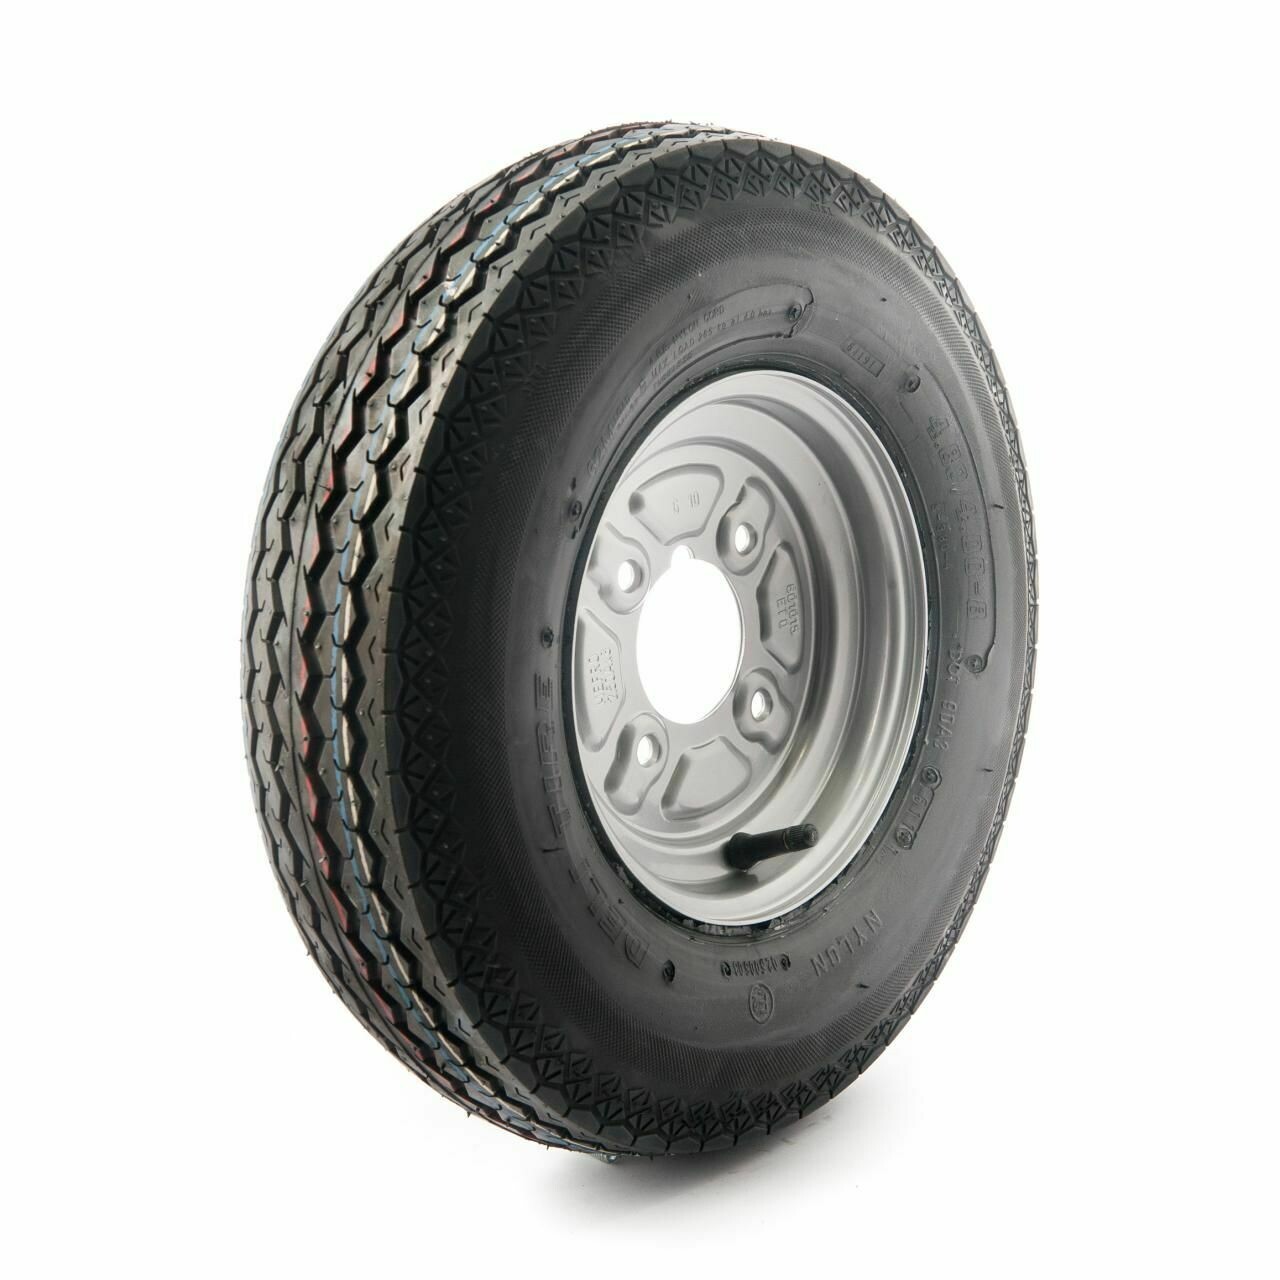 400 x 8 6ply (4 x 4 inch pcd) trailer wheel and tyre